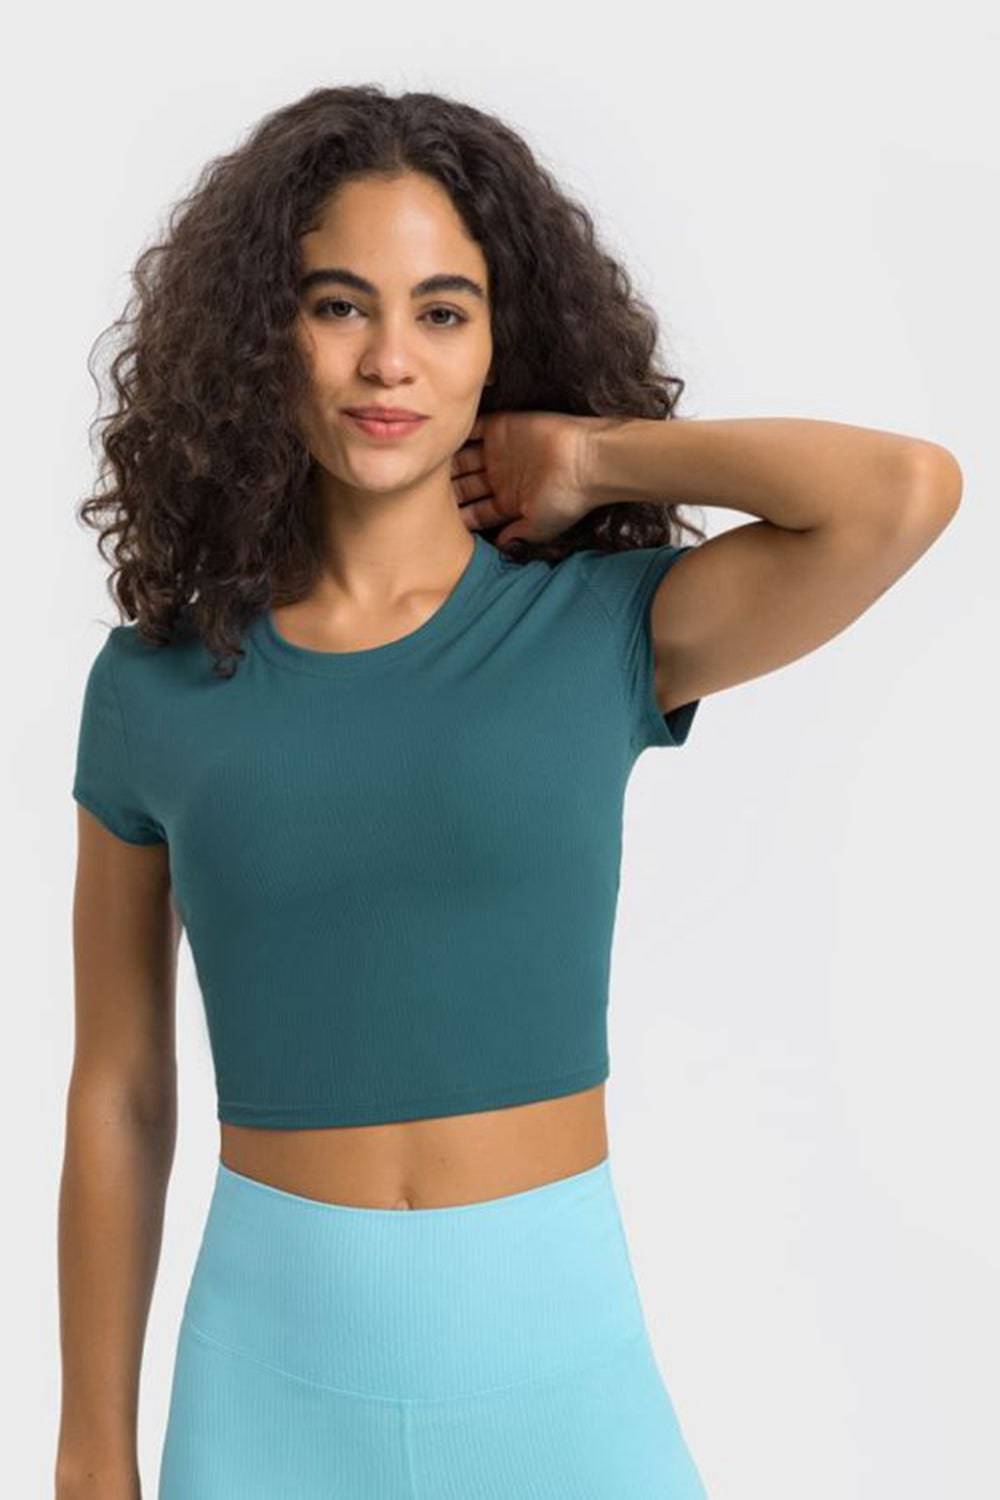 Embrace Your Beauty - Reveal Your Passion - Fall in Love with Our Round Neck Short Sleeve Cropped Sports T-Shirt. - Guy Christopher